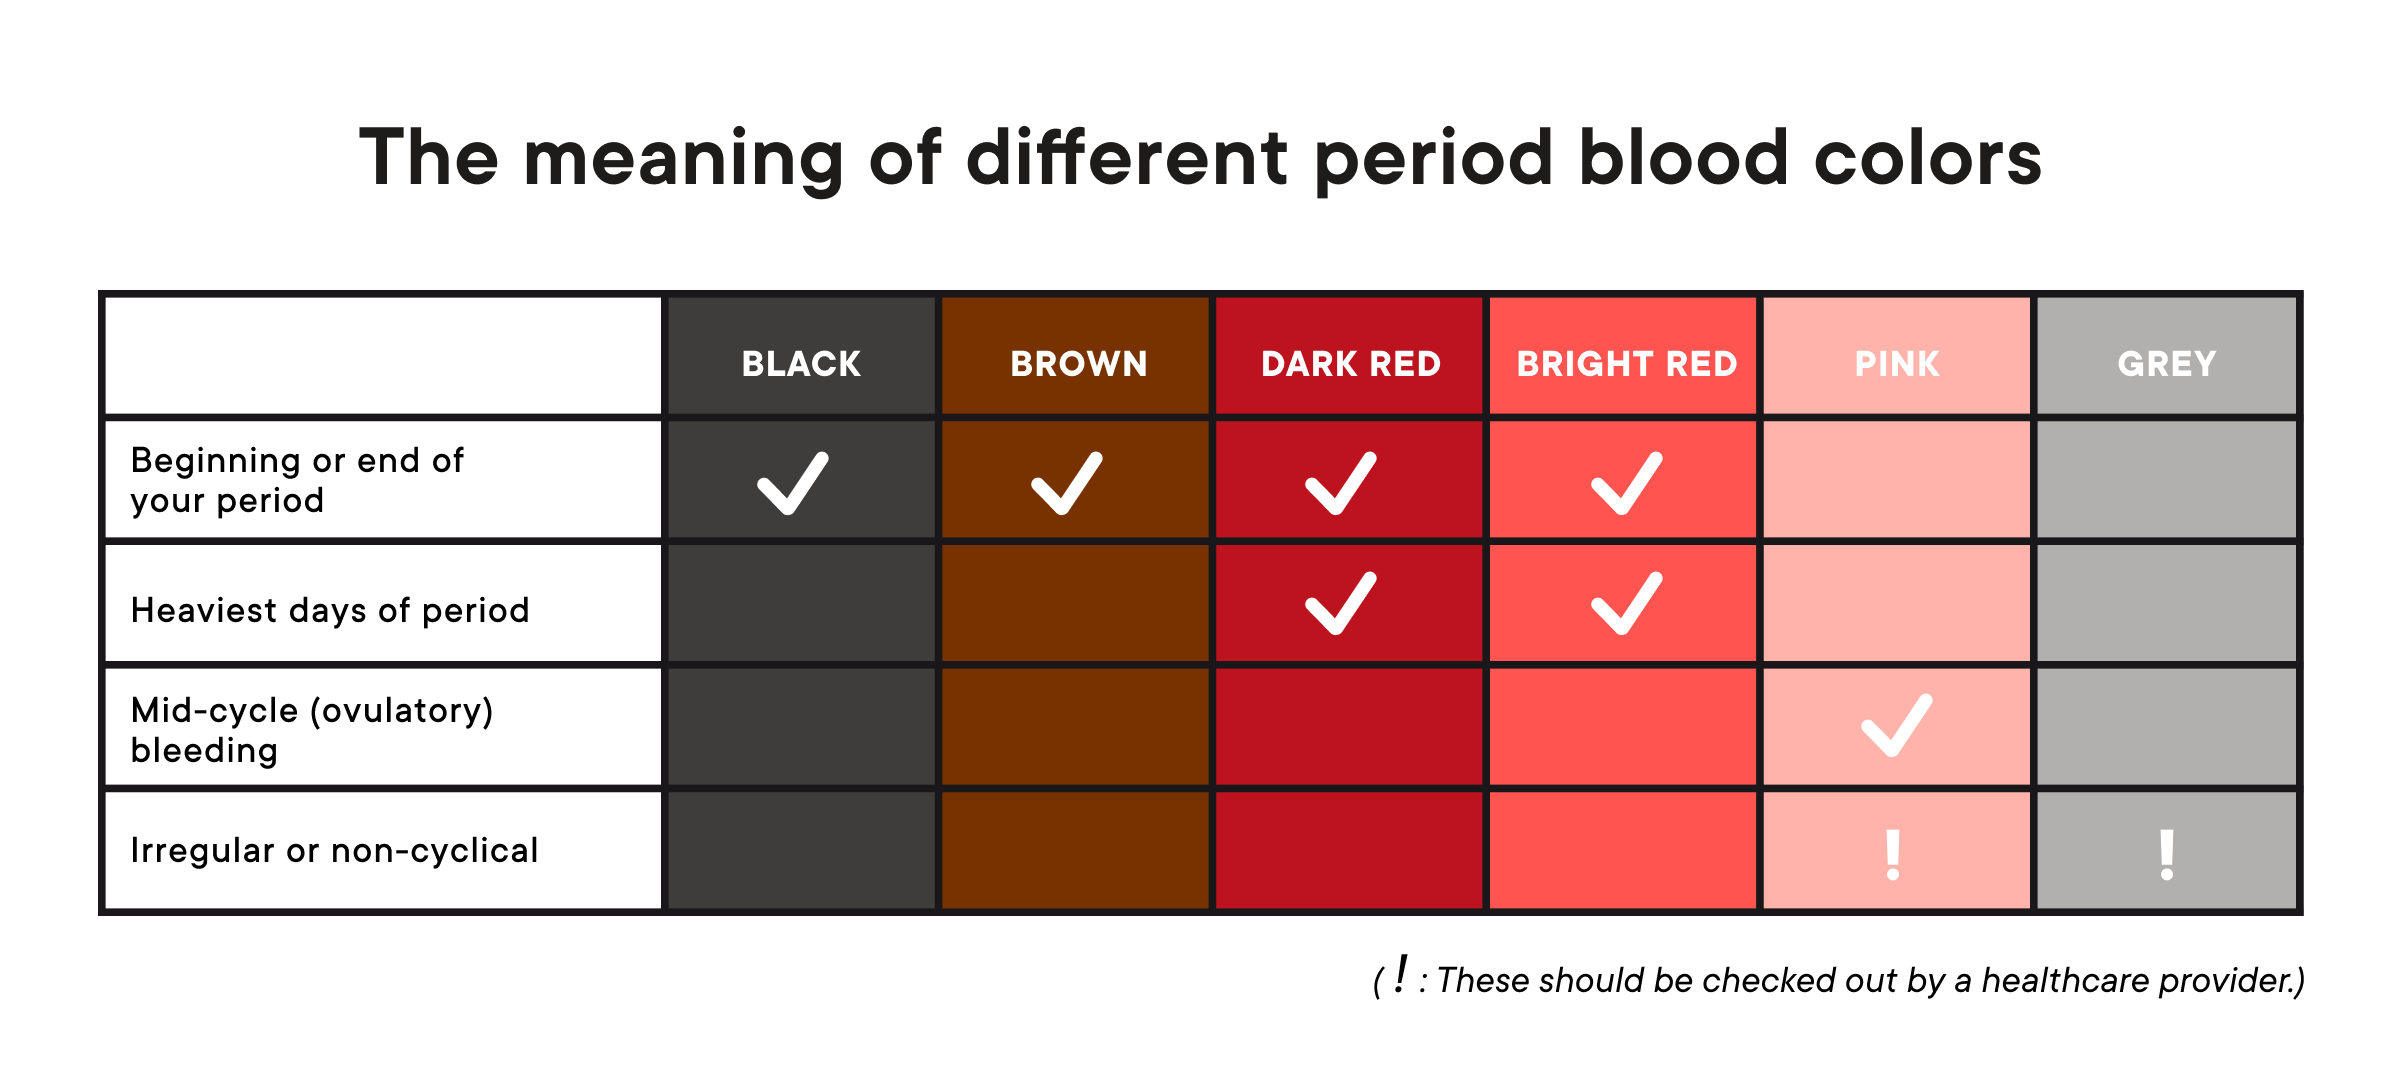 Table showing the meanings of black, brown, dark red, bright red, pink, and grey period blood. 